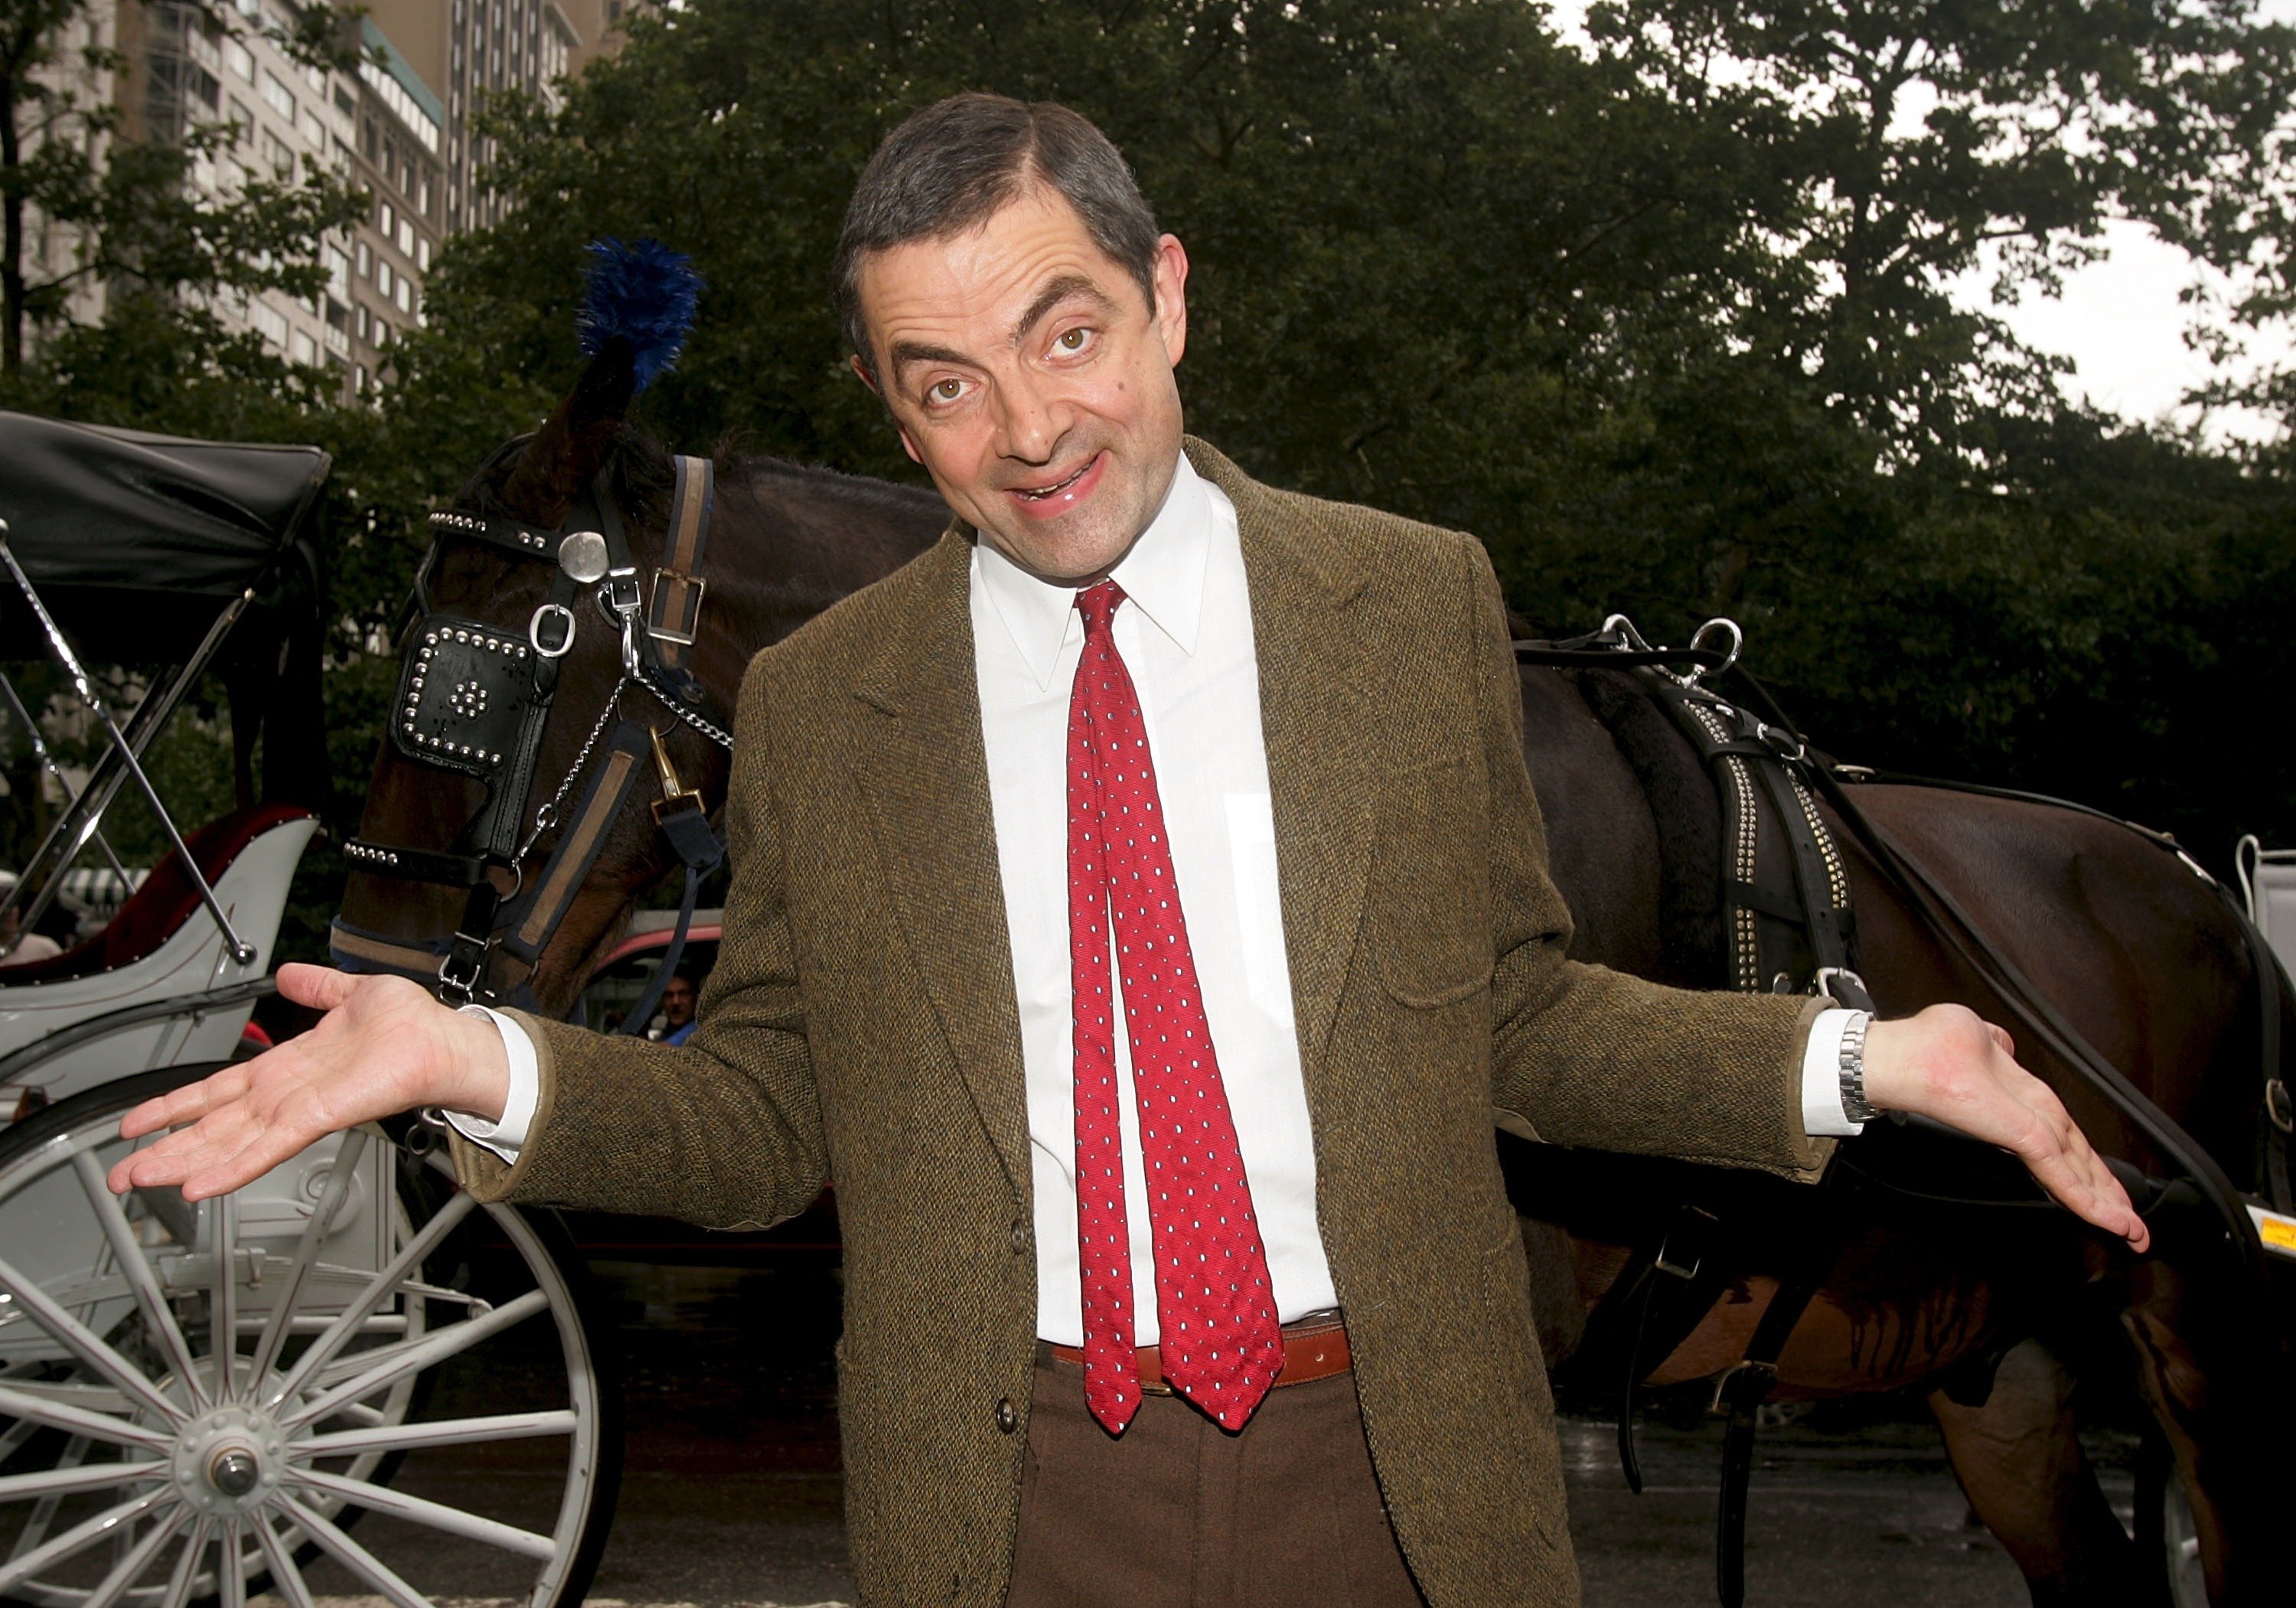 Rowan Atkinson dressed up as his iconic character Mr. Bean and posed in front of a horse and buggy on July 19, 2007, in New York City to promote his new film "Mr. Beans' Holiday." | Source: Getty Images